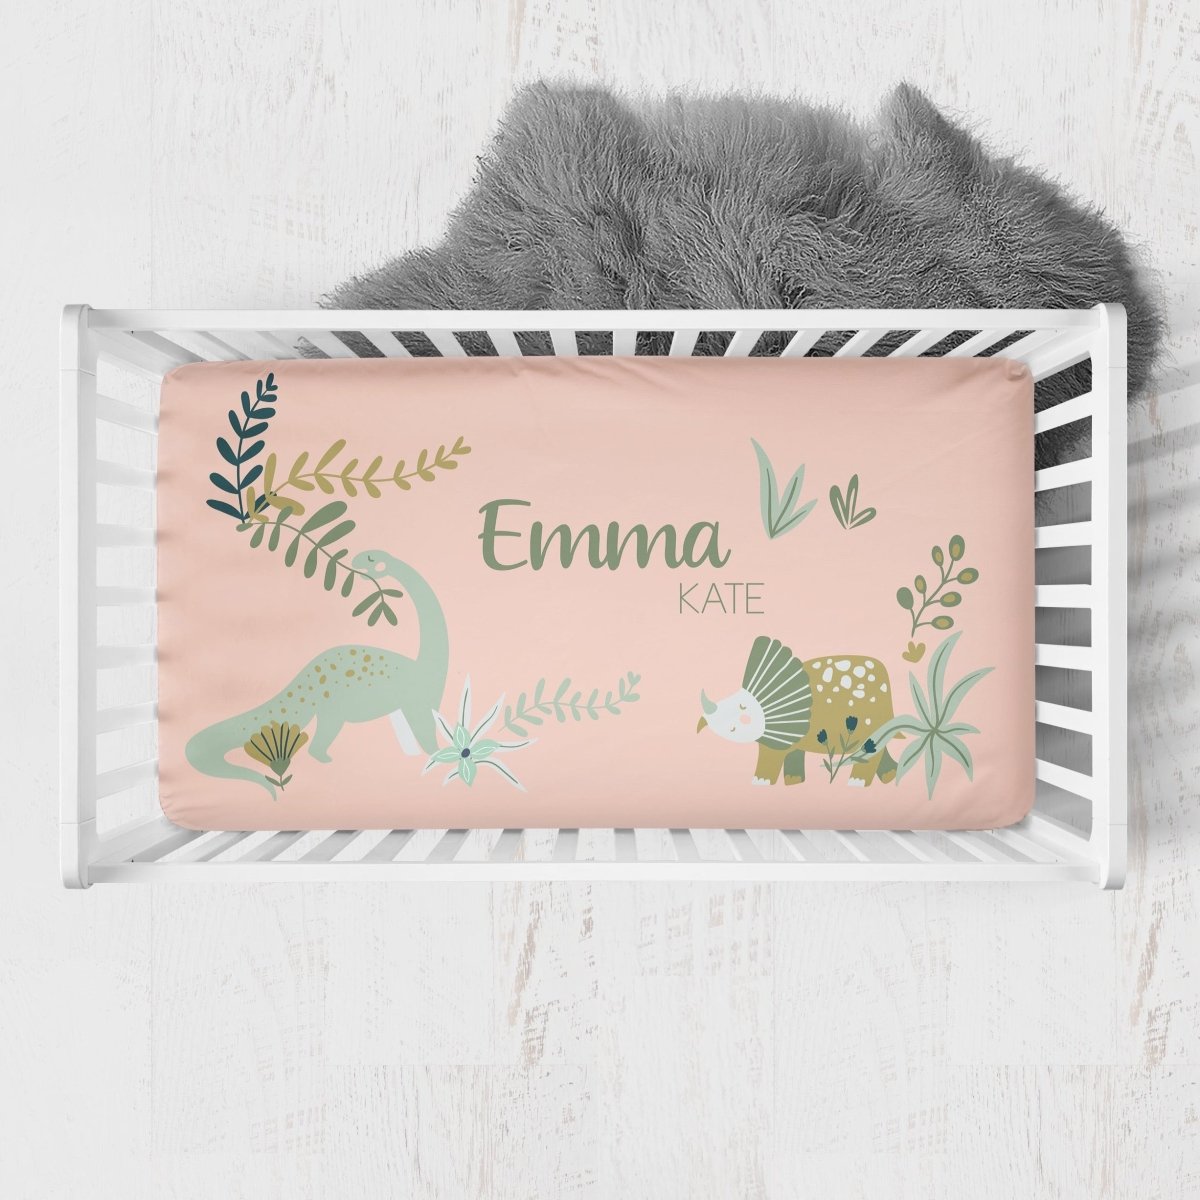 Dinosaur Garden Personalized Crib Sheet - gender_girl, Personalized_Yes, text